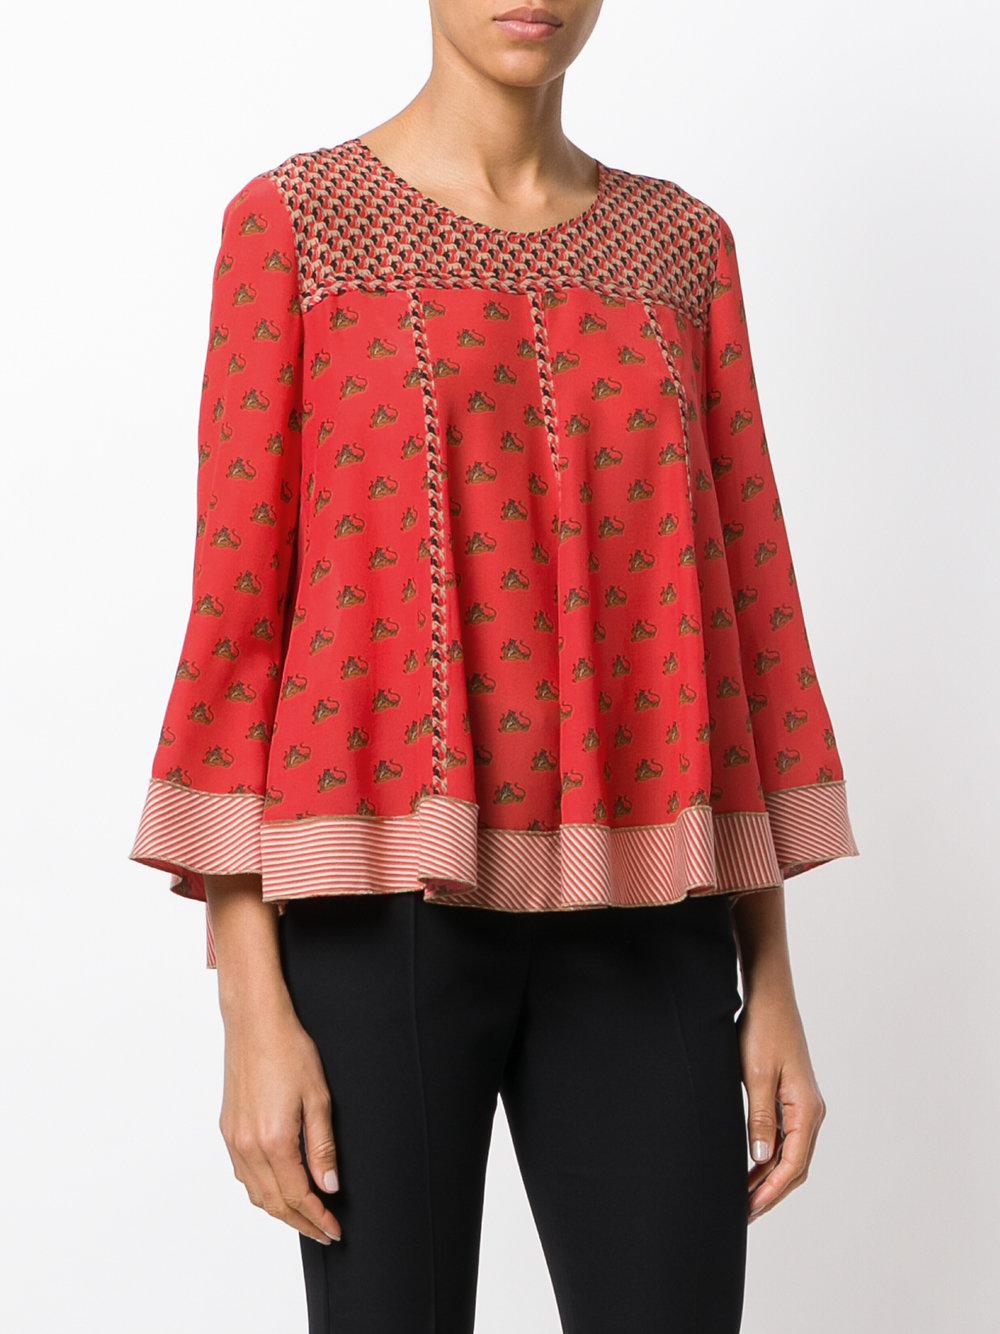 Lyst - Marc cain Printed Blouse in Red